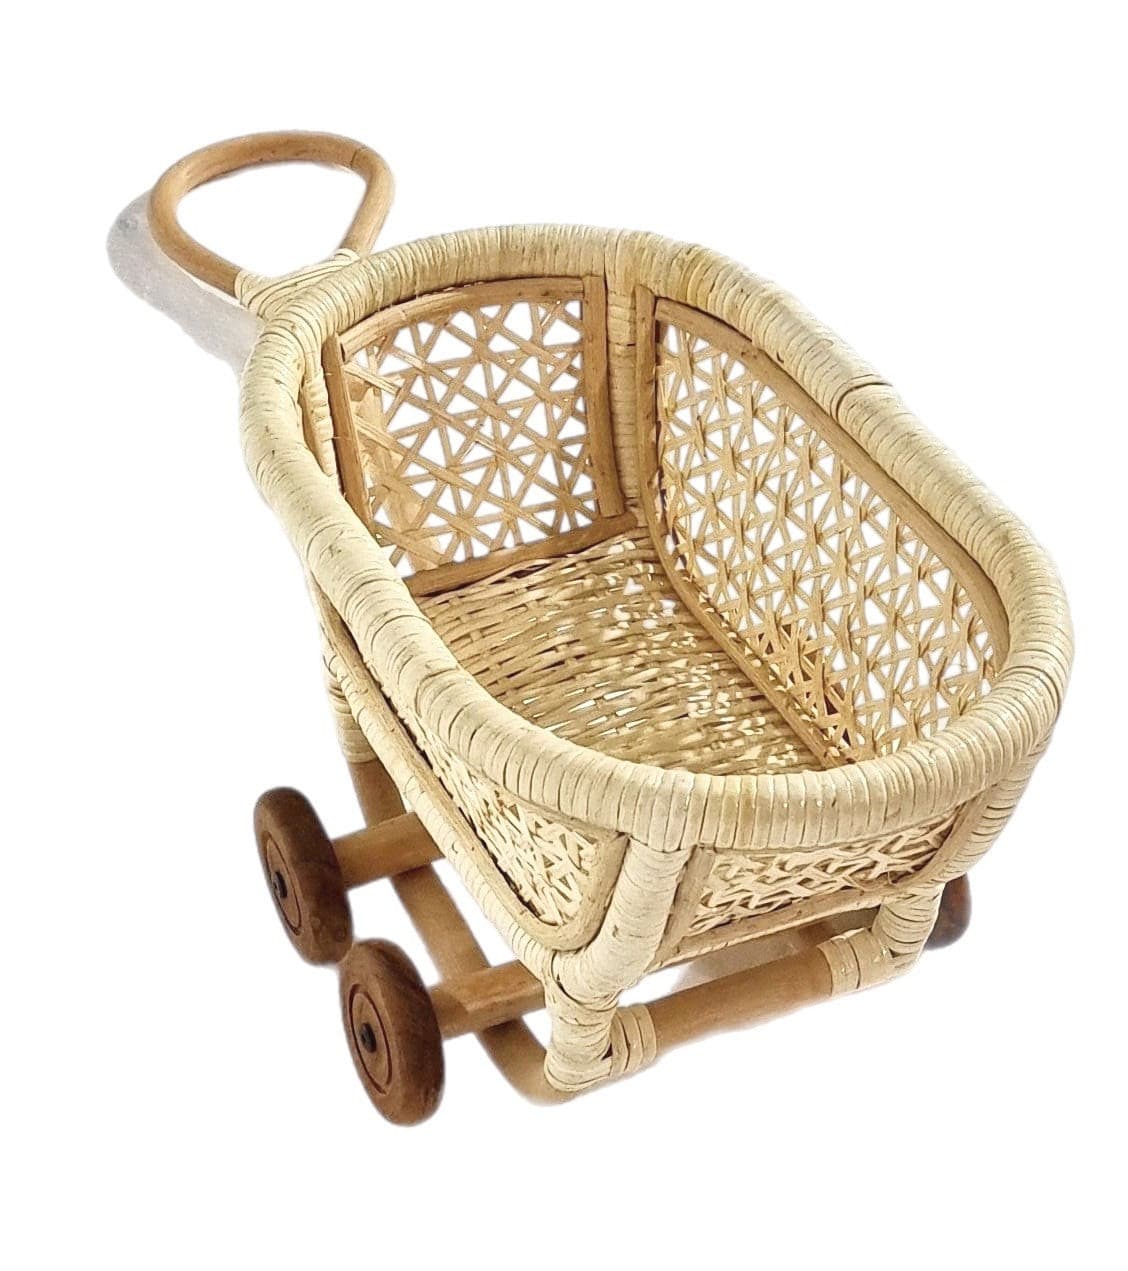 Rattan Toy Wagon by Lily Sprout Collection - Lily Sprout Collection